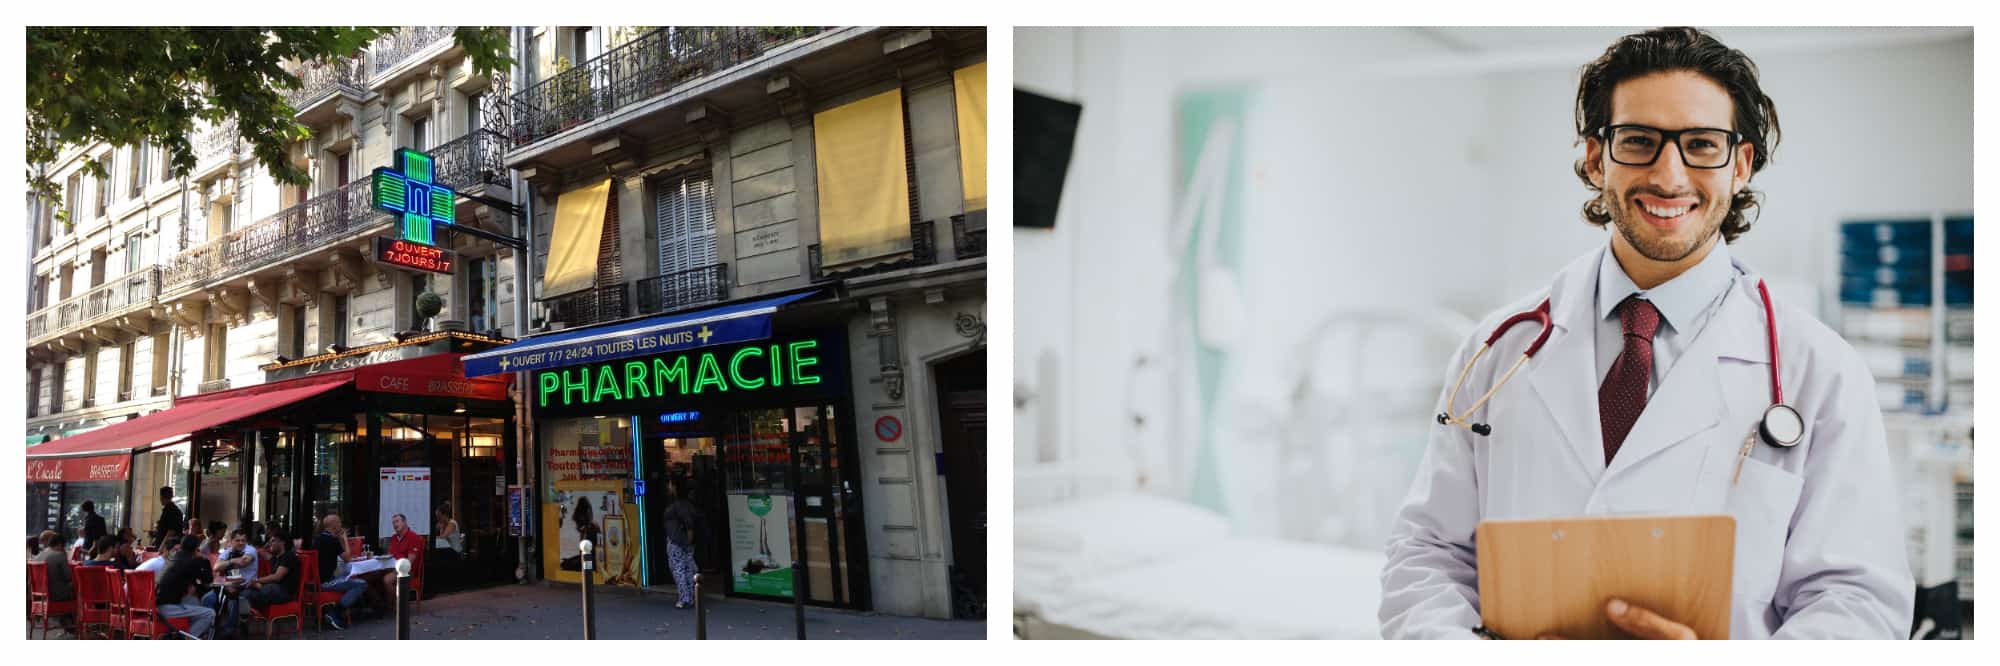 On the left: On a sunny day, a glowing green cross suspended from the first floor of a Paris apartment building signals to passerby that there is a pharmacy next to the café below. On the right: a friendly male doctor wearing thick-rimmed glasses and a stethoscope holds a clipboard, ready to welcome his patient. 